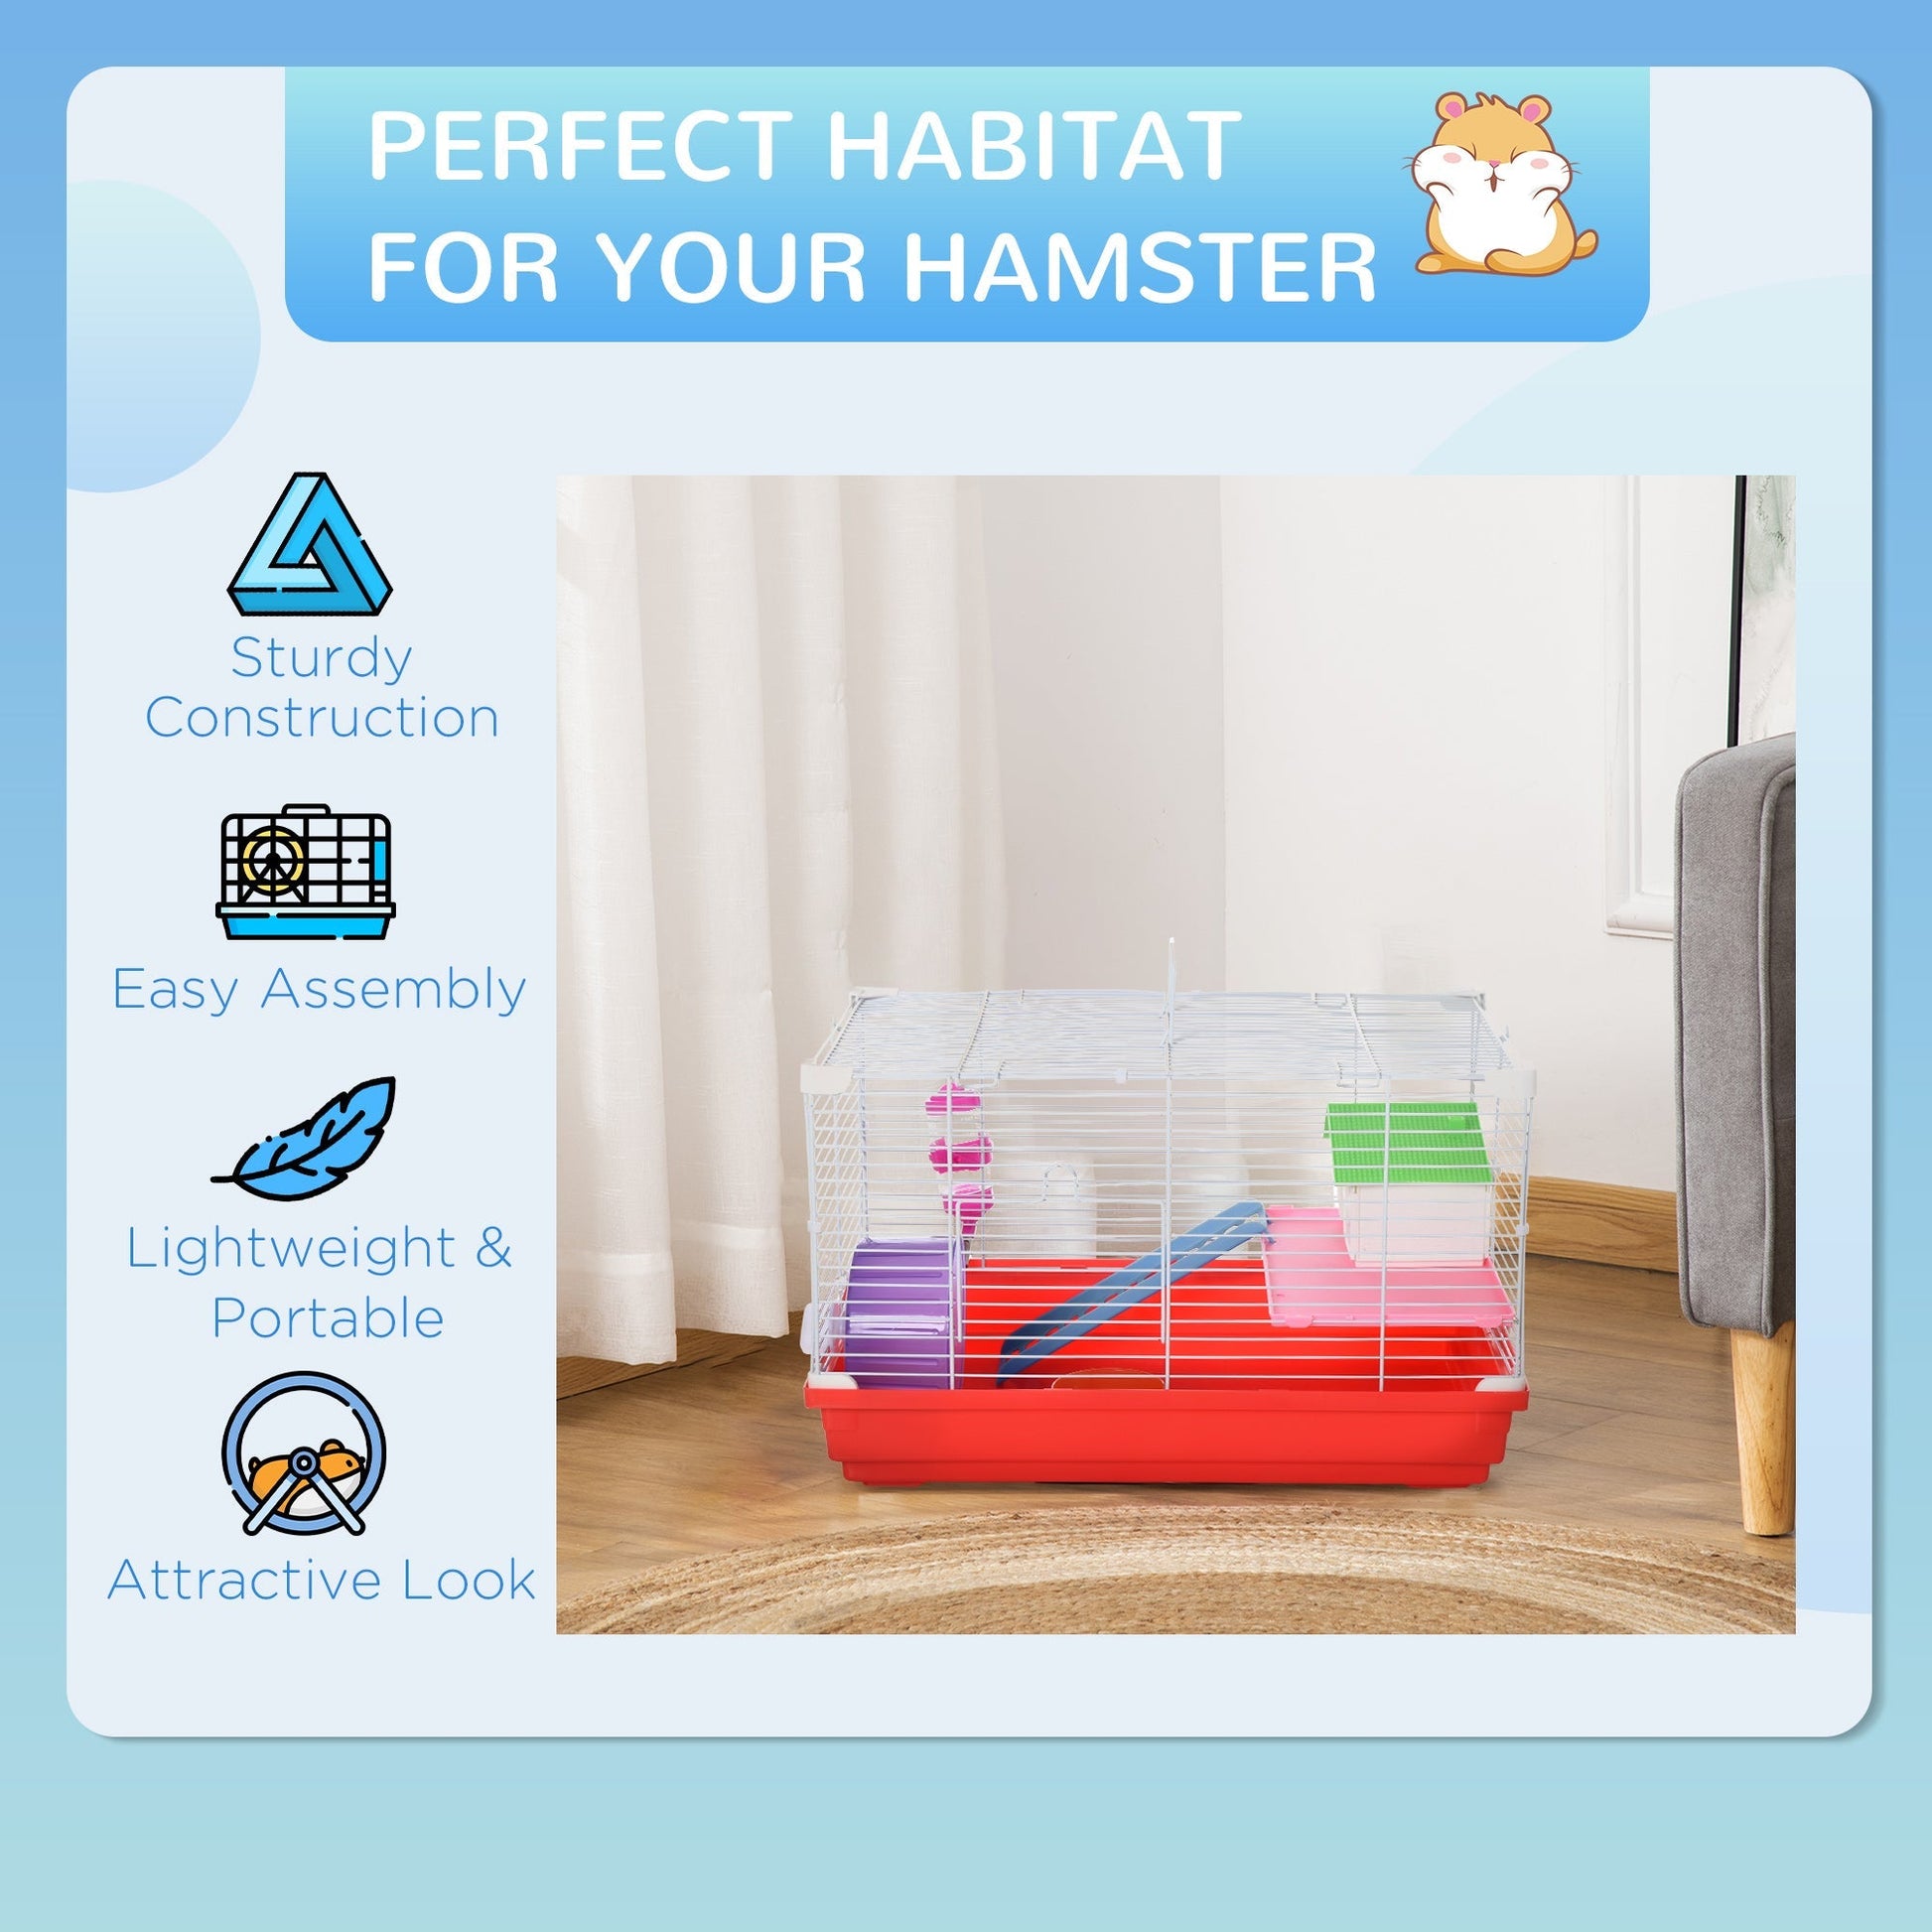 18.5'' Hamster Cage with Exercise Wheel and Water Bottle Dishes, Rat House and Habitats 2 Storey Design, Red at Gallery Canada